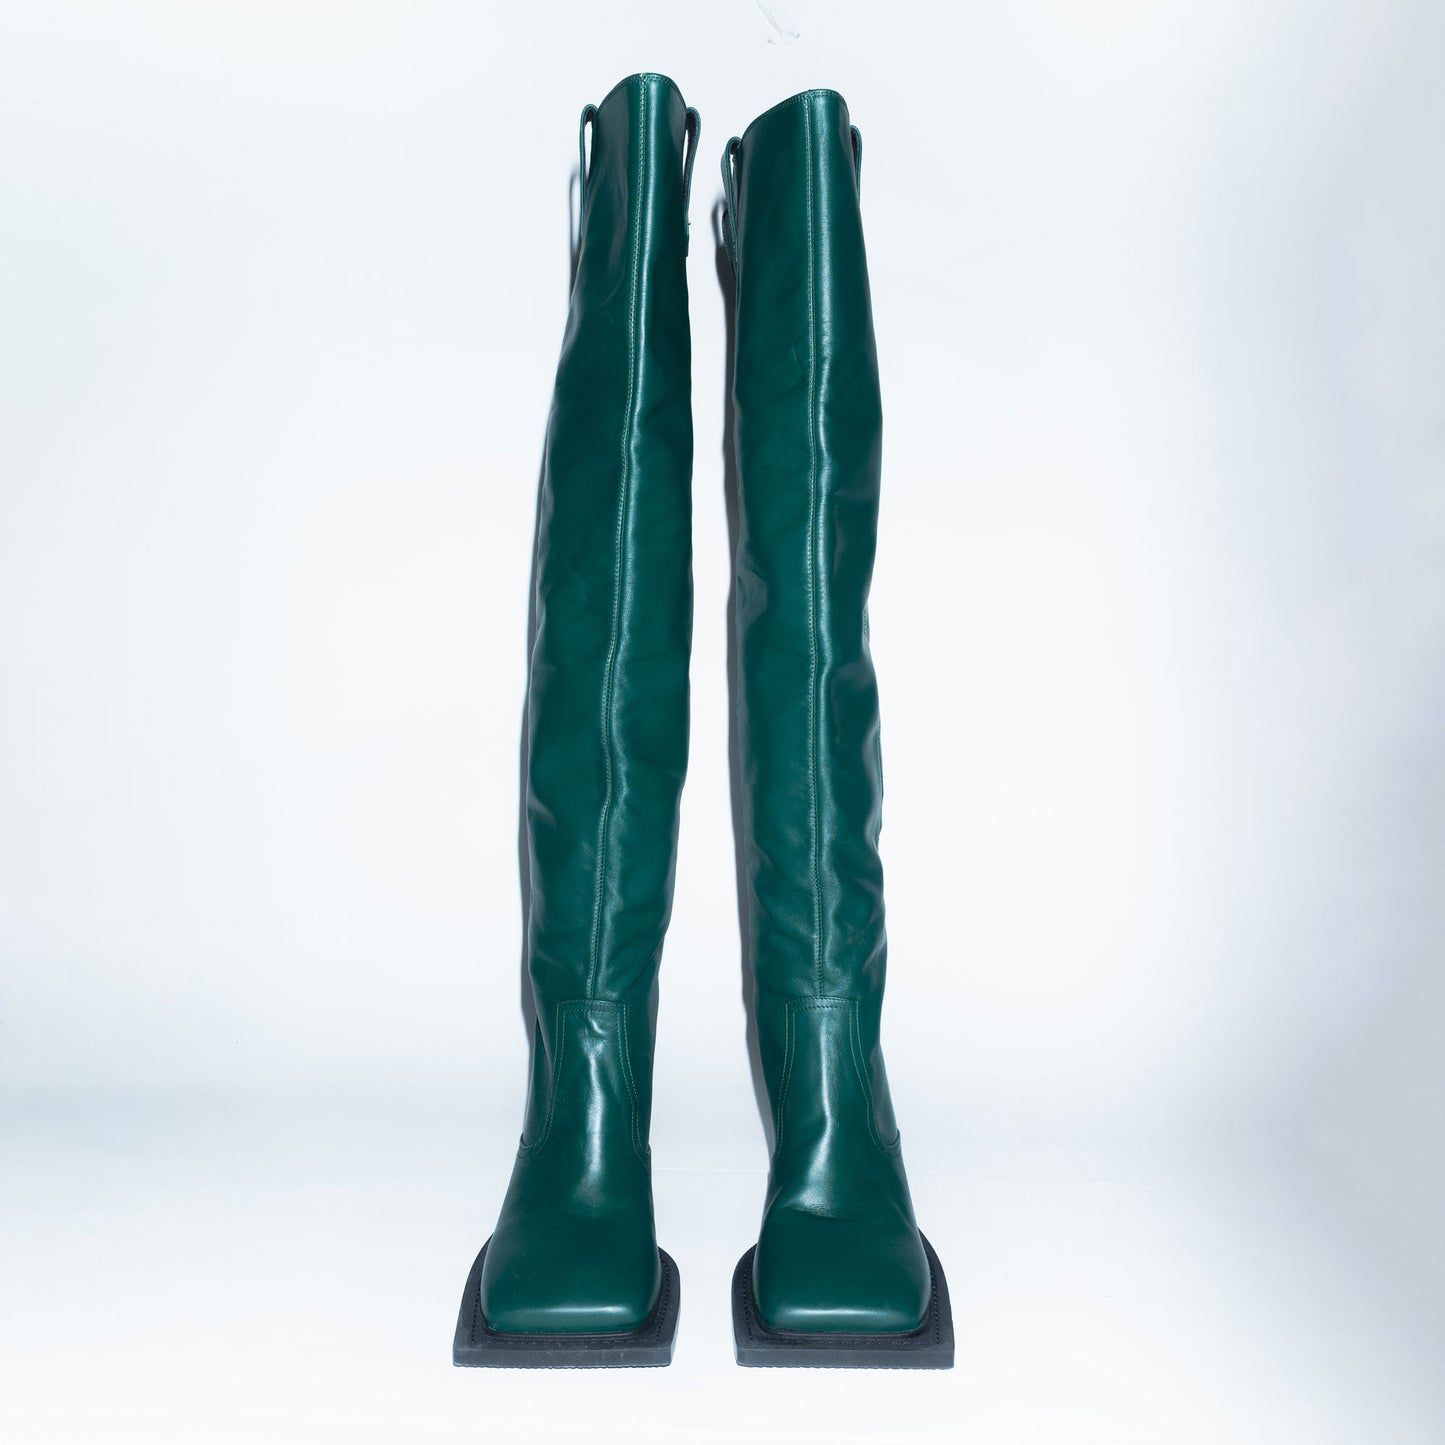 Archive Howling Knee High Boots in Dark Green Leather